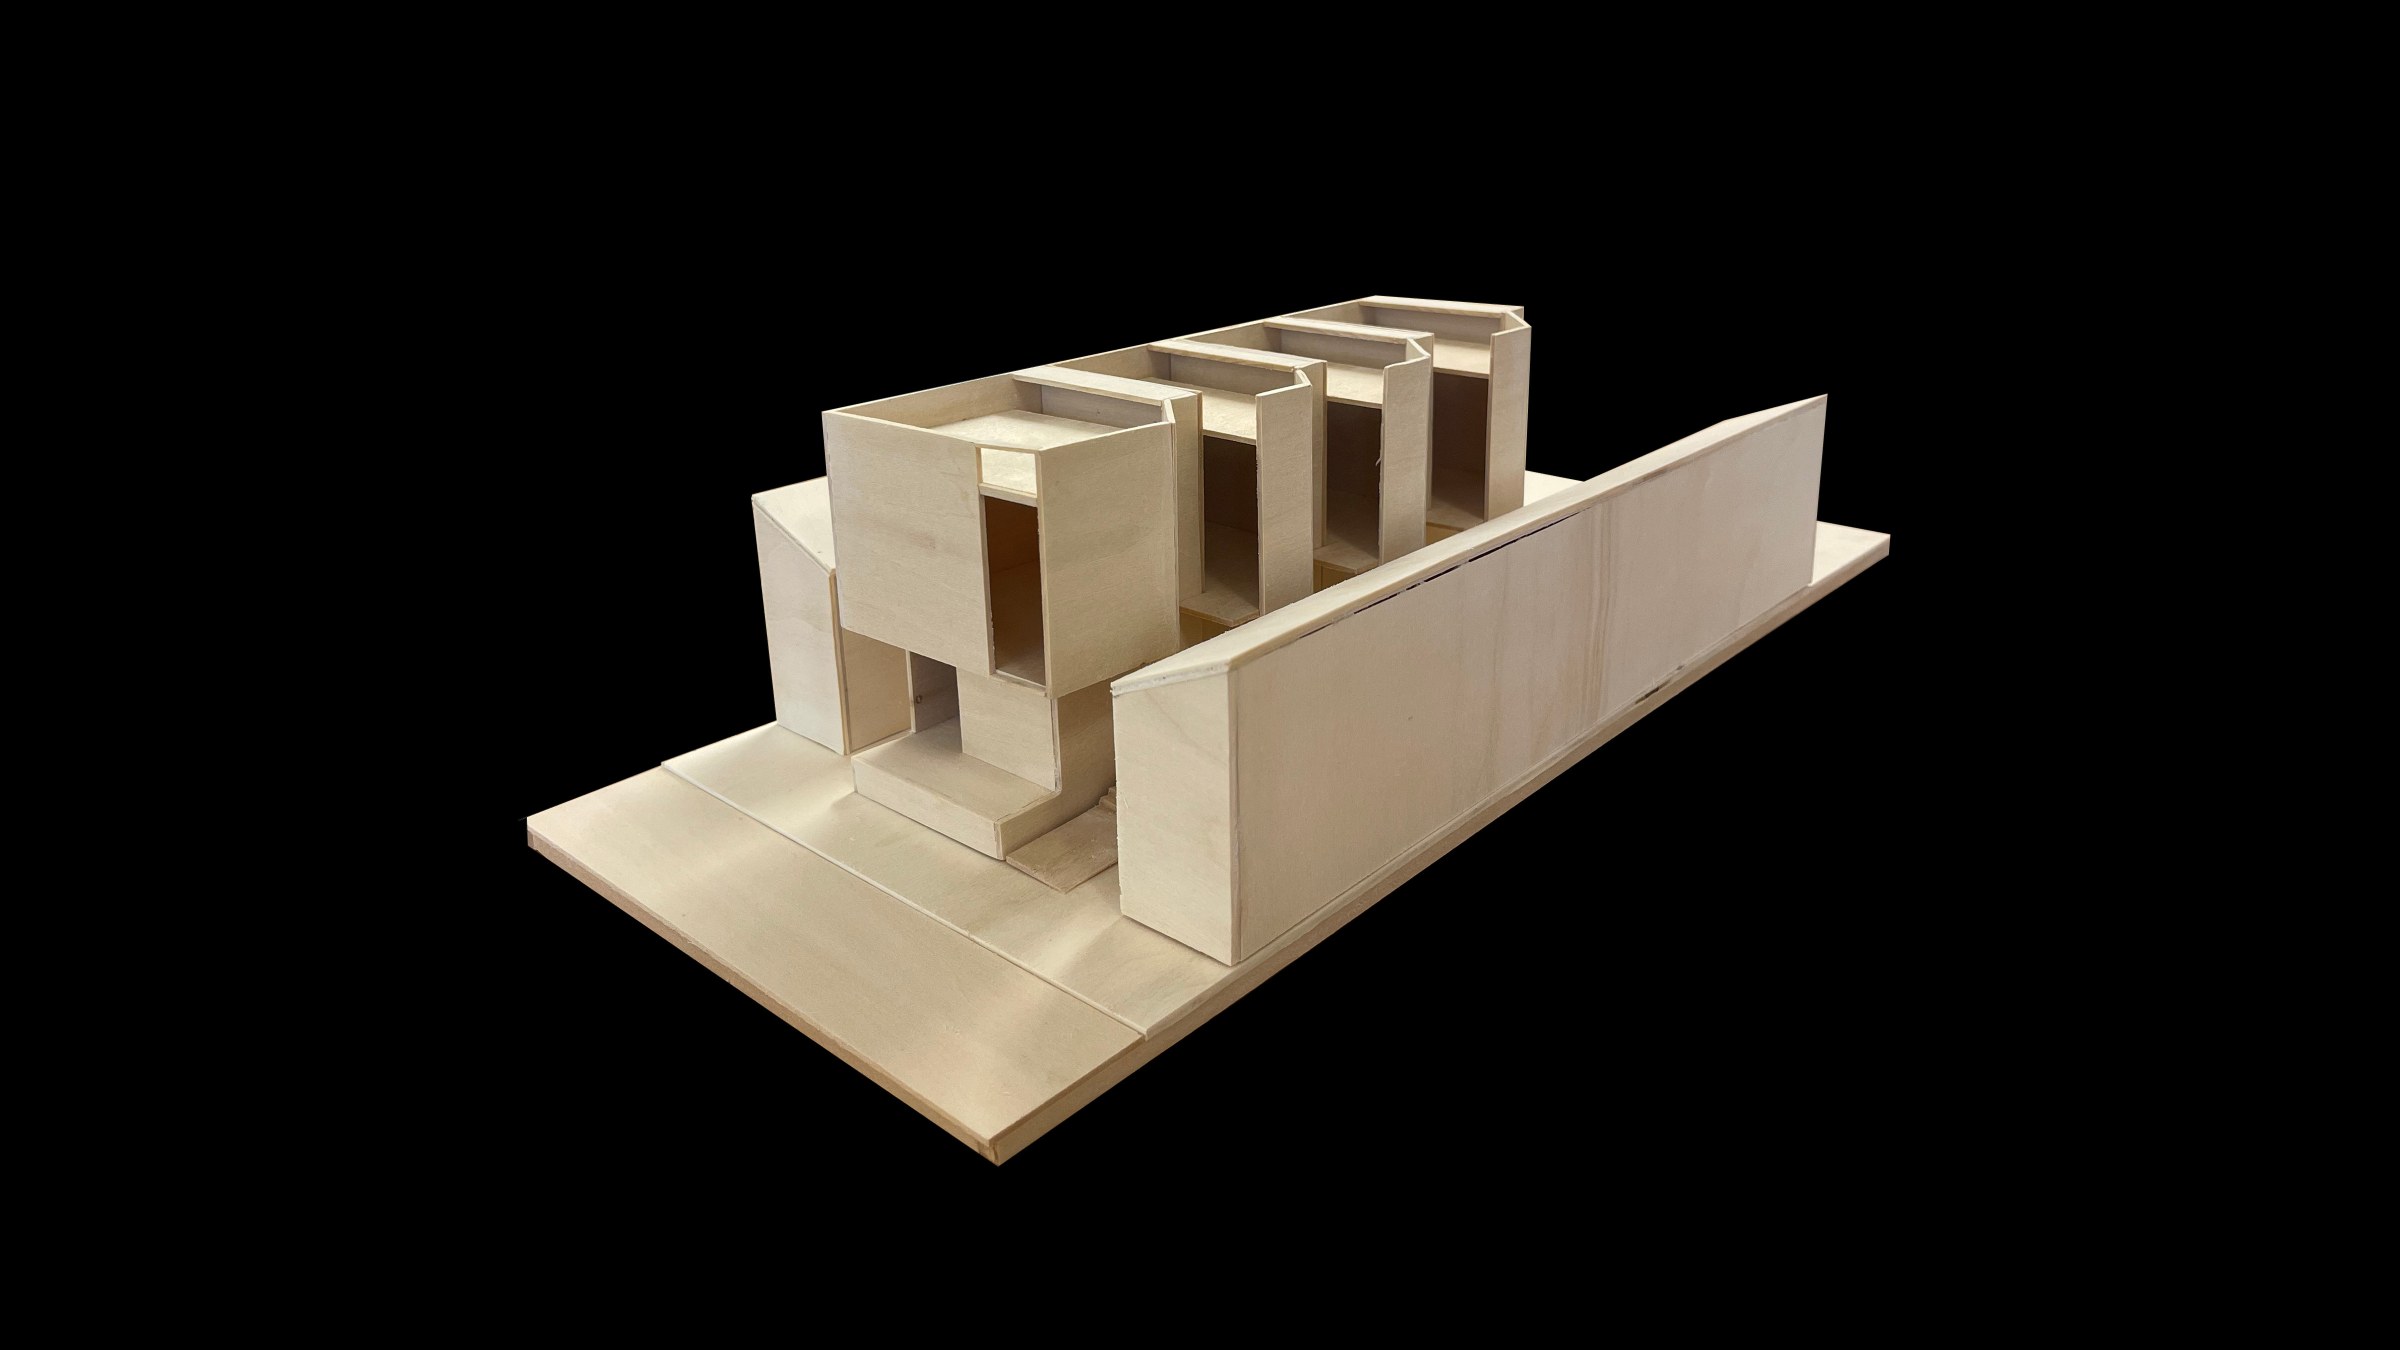 Daniel Tighe's thesis project: built model 1